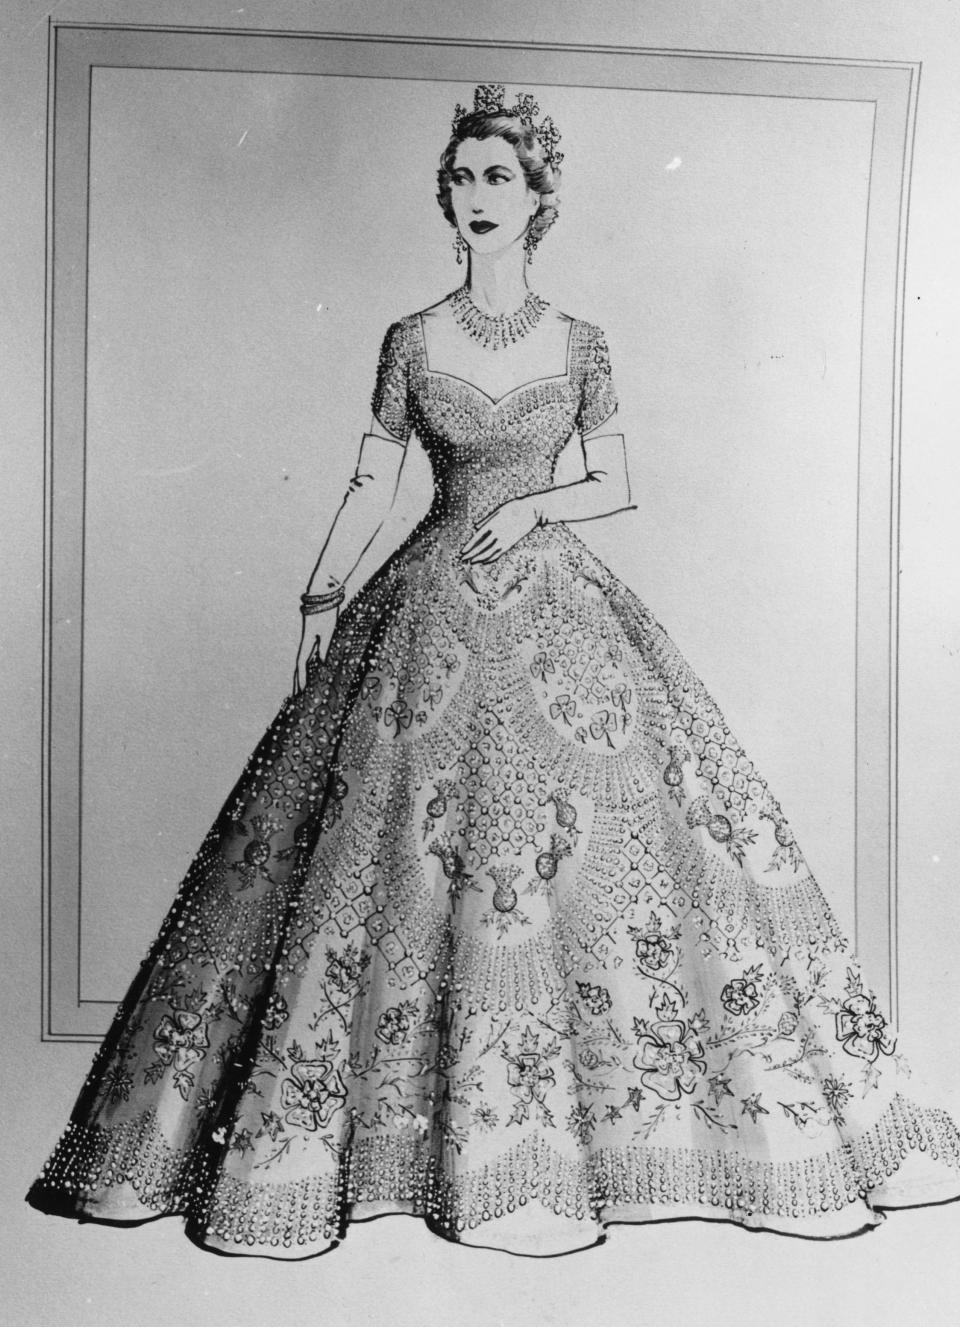 June 1953:  Norman Hartnell design of Queen Elizabeth's dress for the Coronation ceremony. Original Publication: Picture Post - 6540 - Under The Red Robe - pub. 1953  (Photo by Haywood Magee/Picture Post/Getty Images)